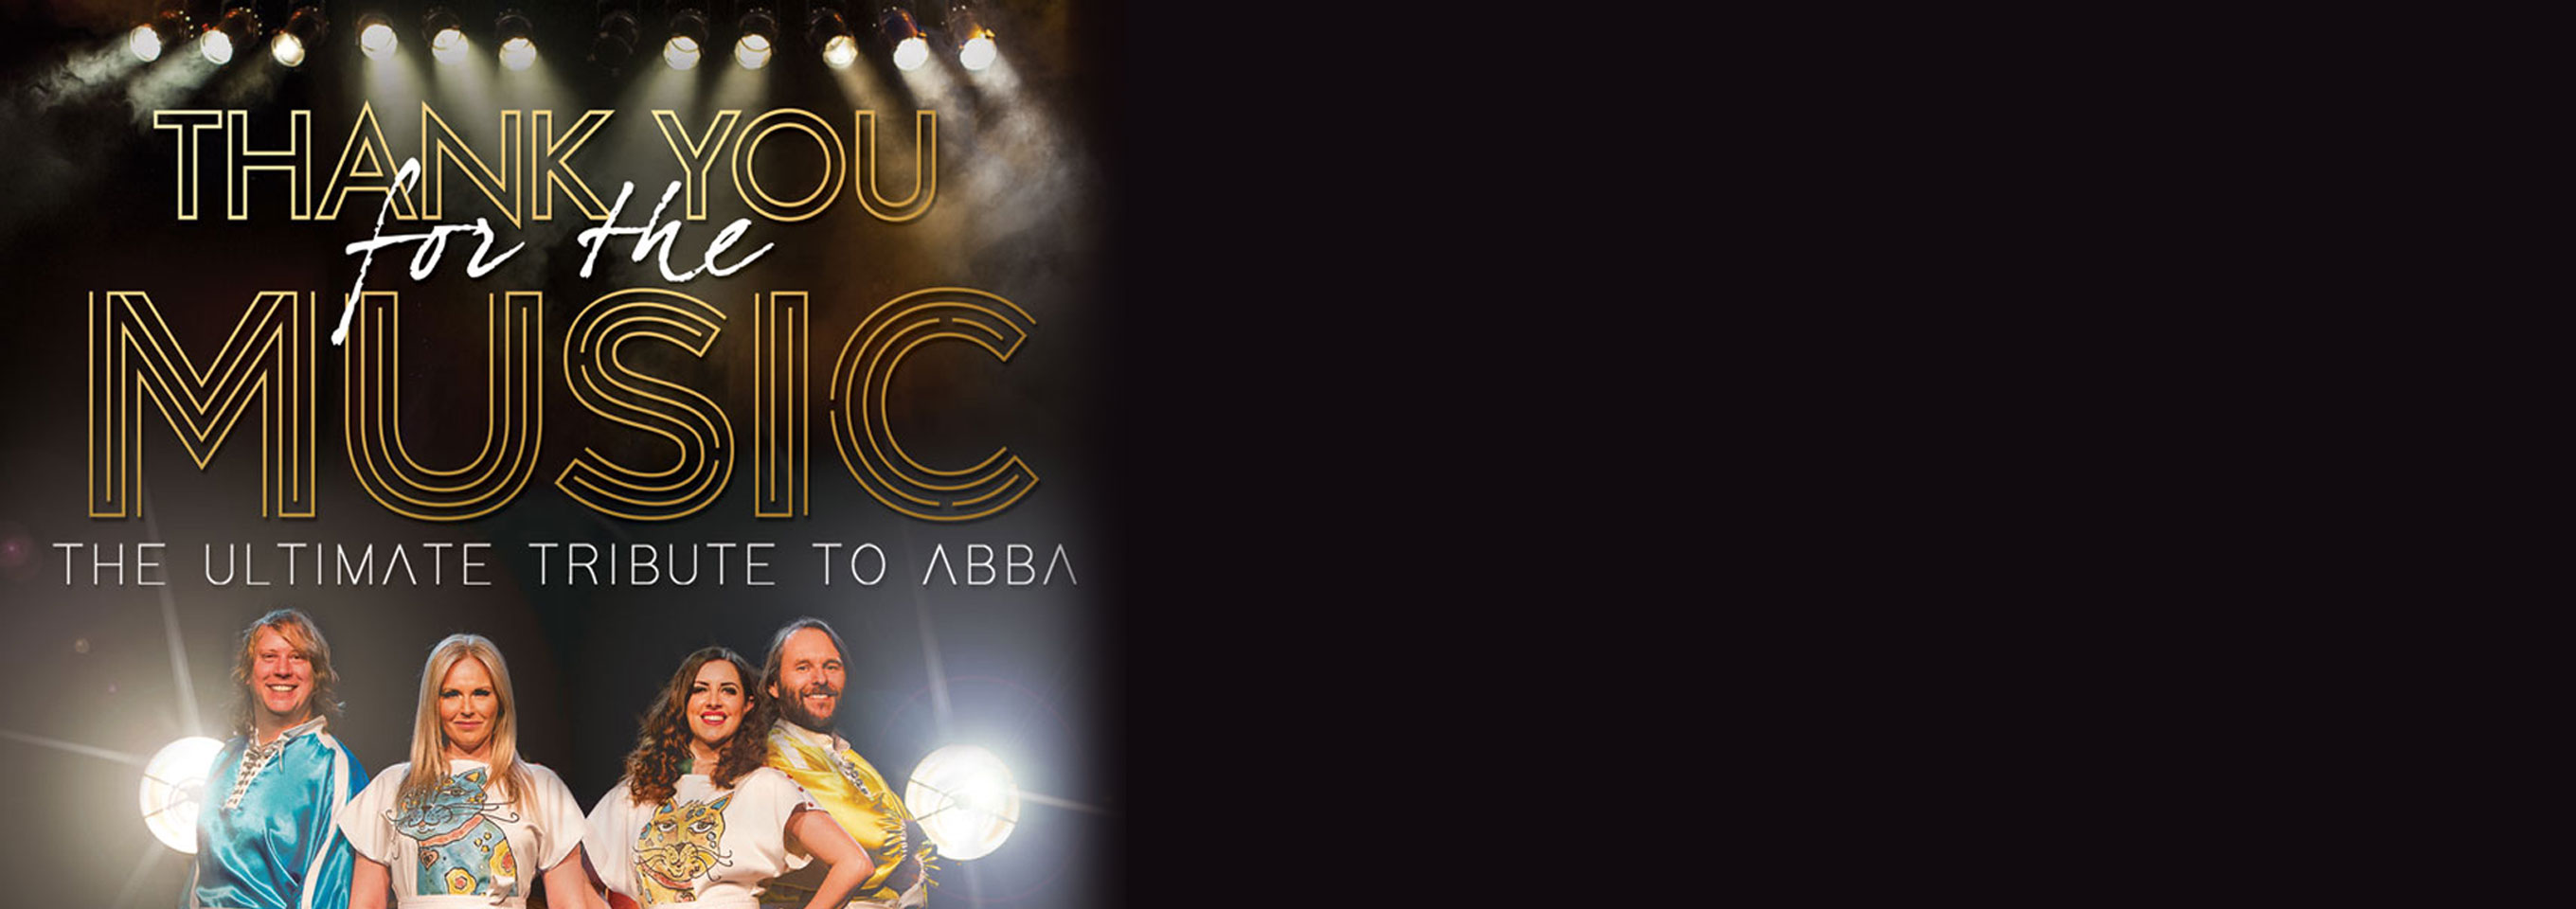 Thank You For The Music: The Ultimate Tribute To ABBA hero image